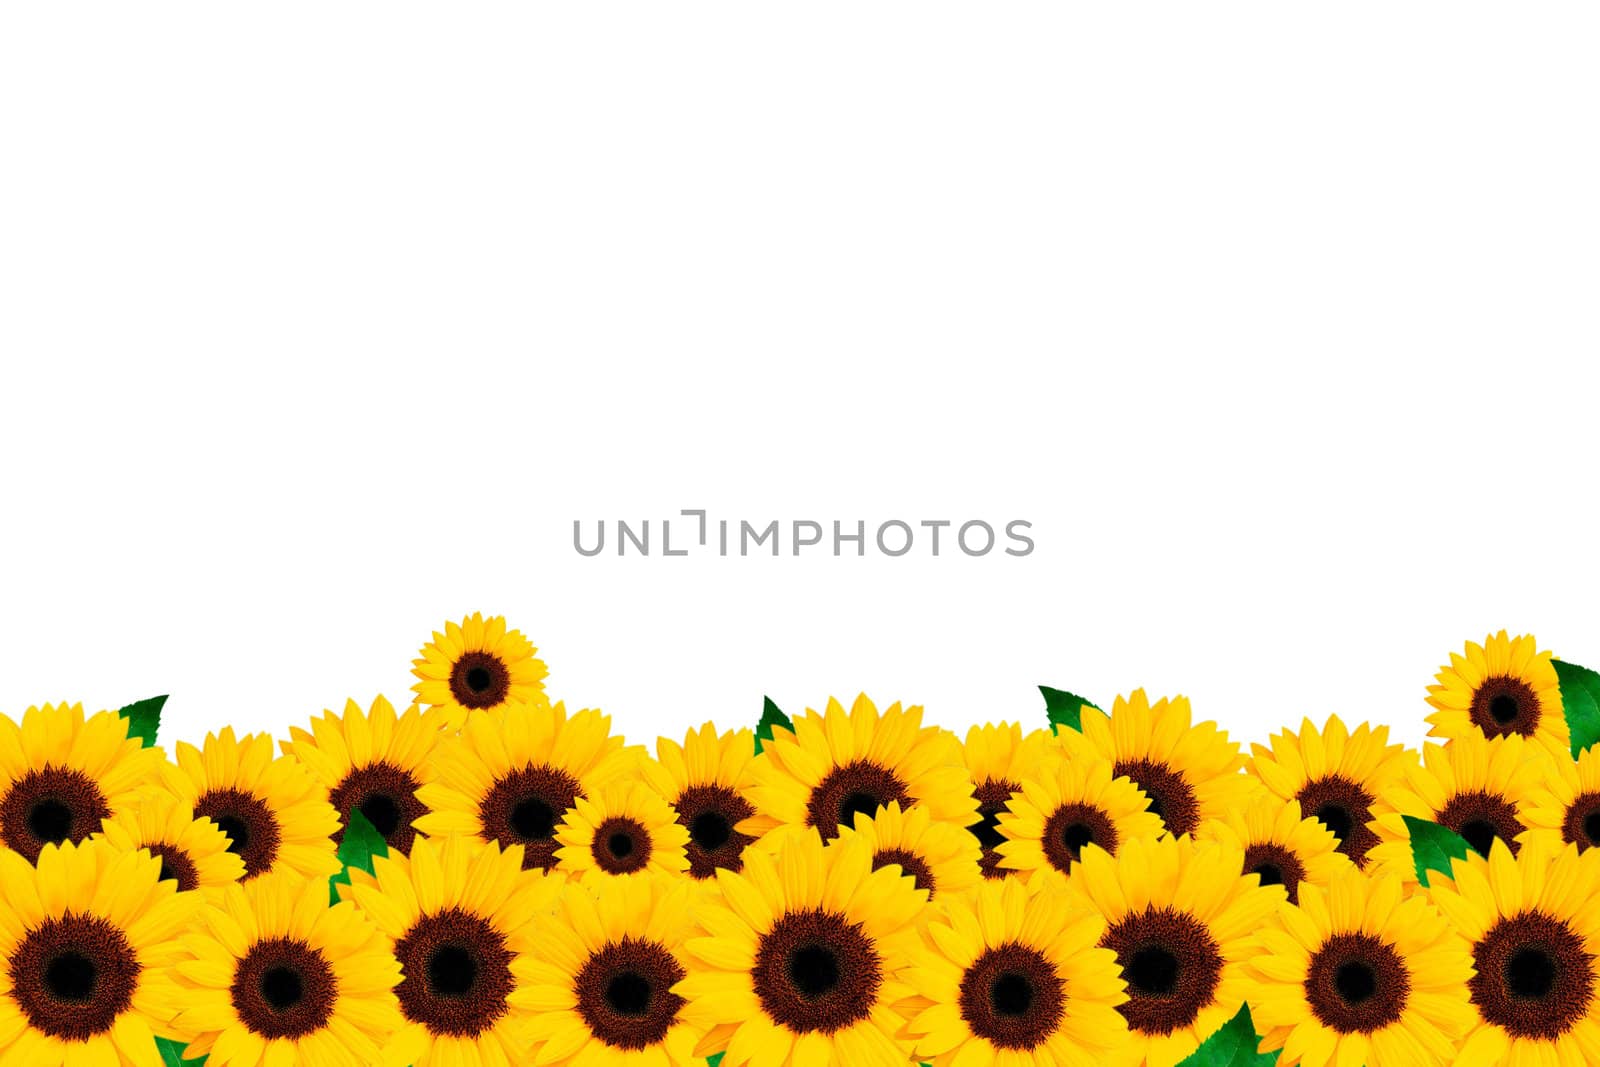 Sunflower on a white background by petrkurgan